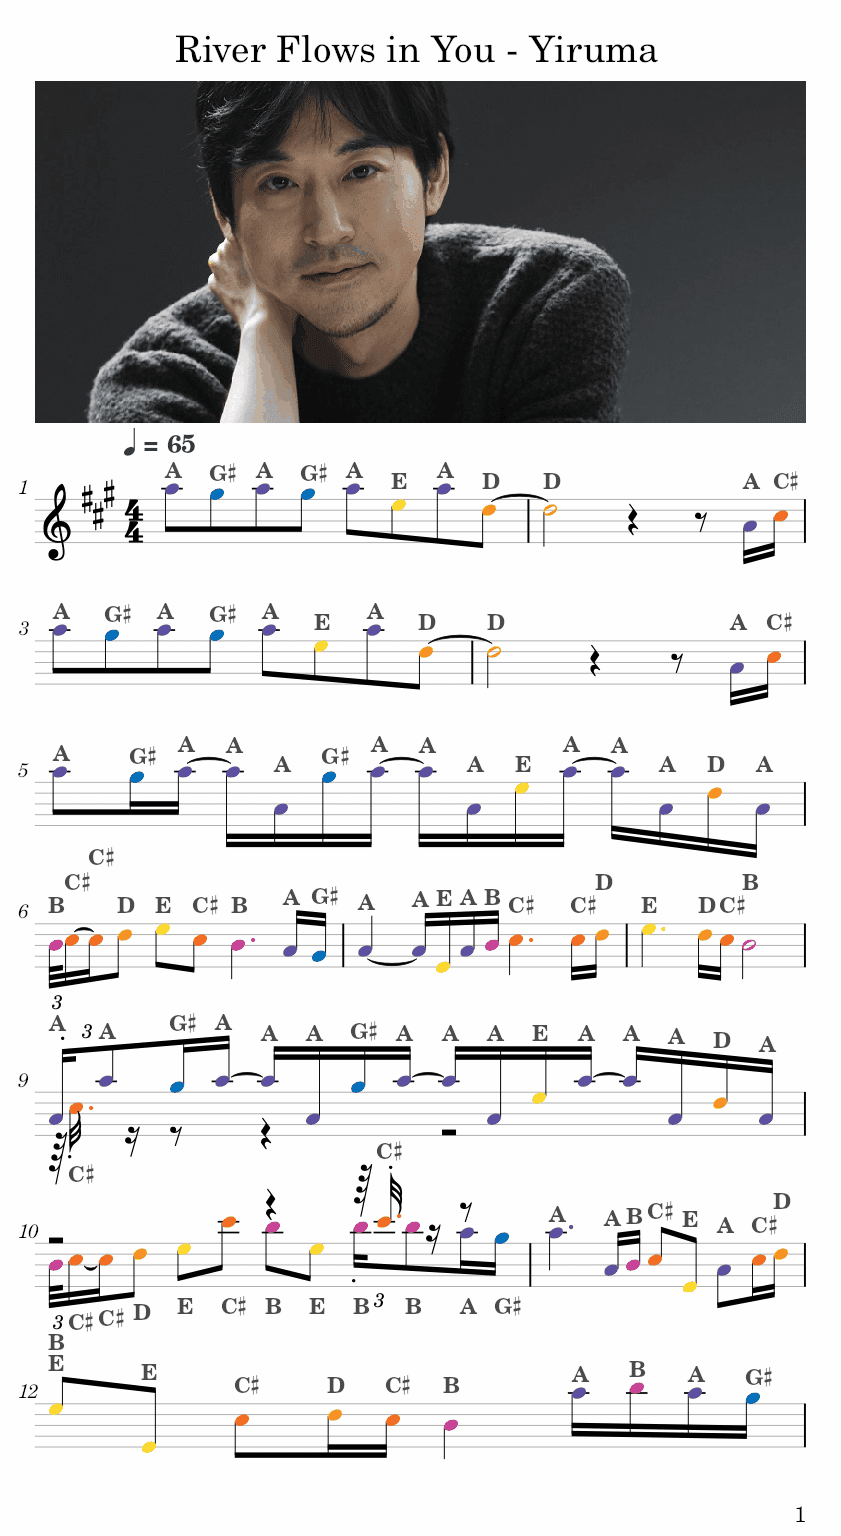 River Flows in You - Yiruma (이루마) Flute Easy Sheets Music for piano, keyboard, flute, violin, sax, celllo 1